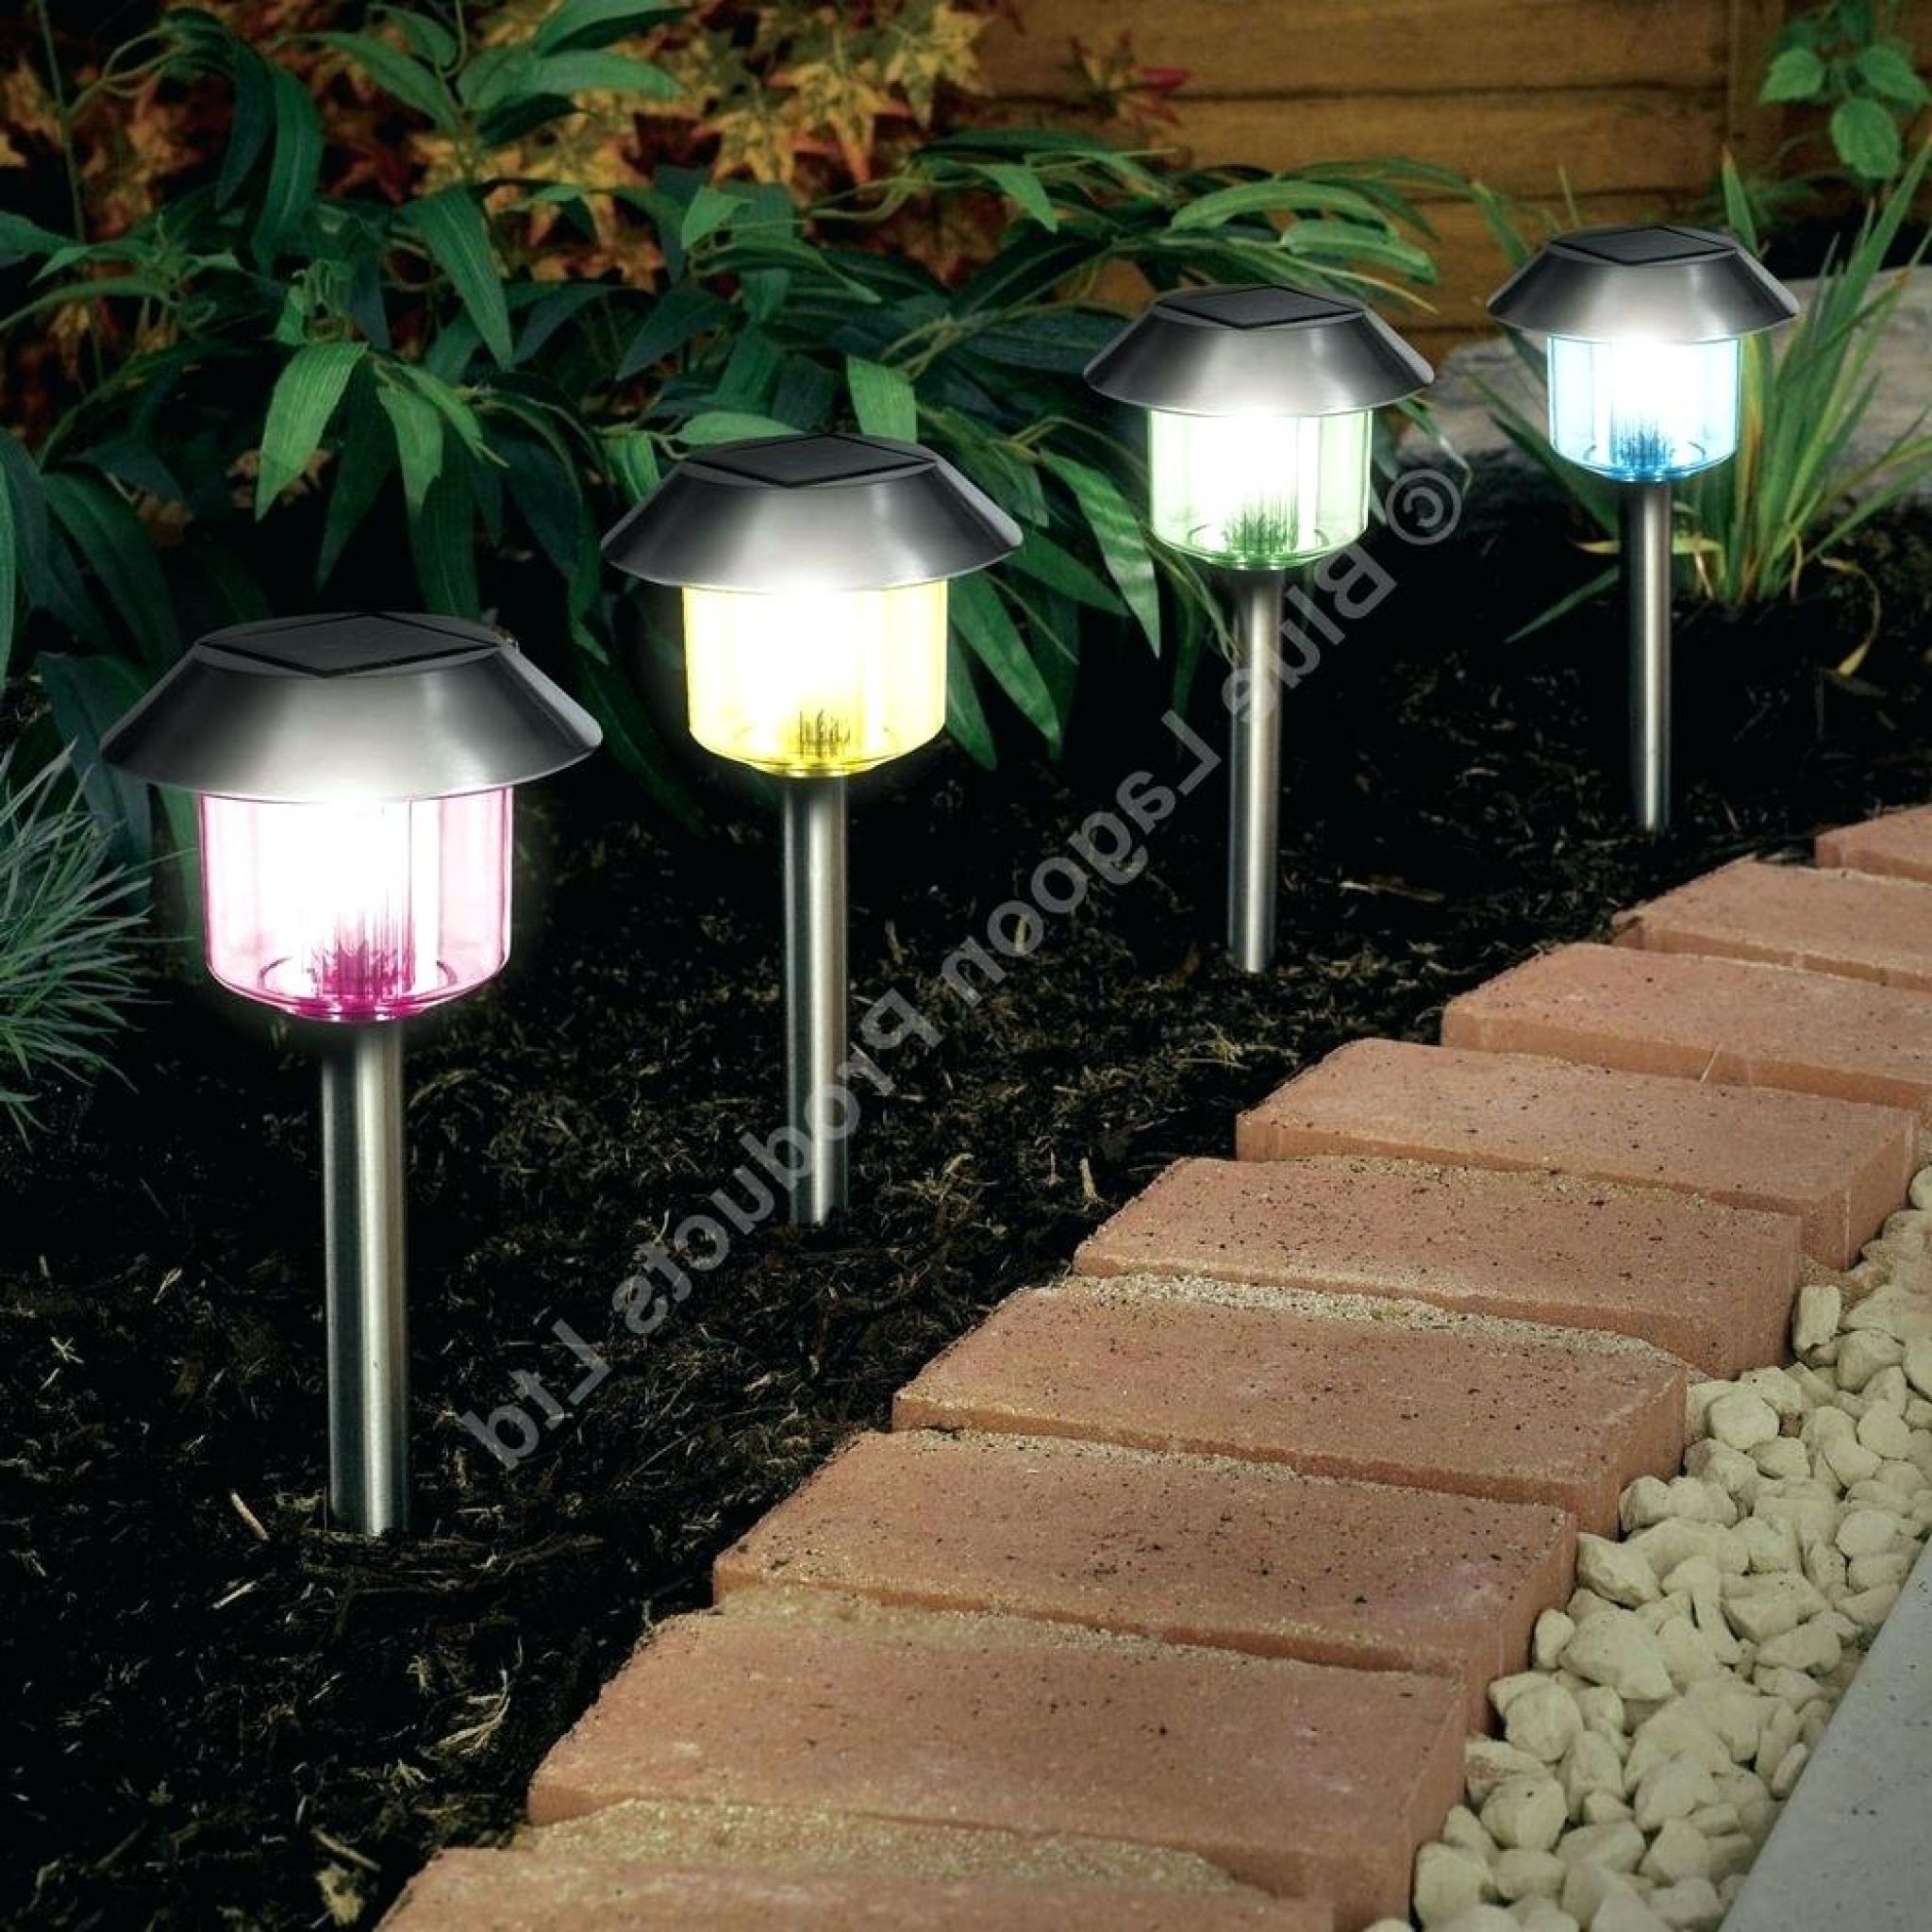 Solar Powered Lamp Post Solar Powered Outdoor Post Lights Solar Powered Lamp Post Lights Solar Pole Lights Outdoor Solar Yard Hgtv Home Solar Powered Lamp Post Light With Built In Planter Base  colormemod.com